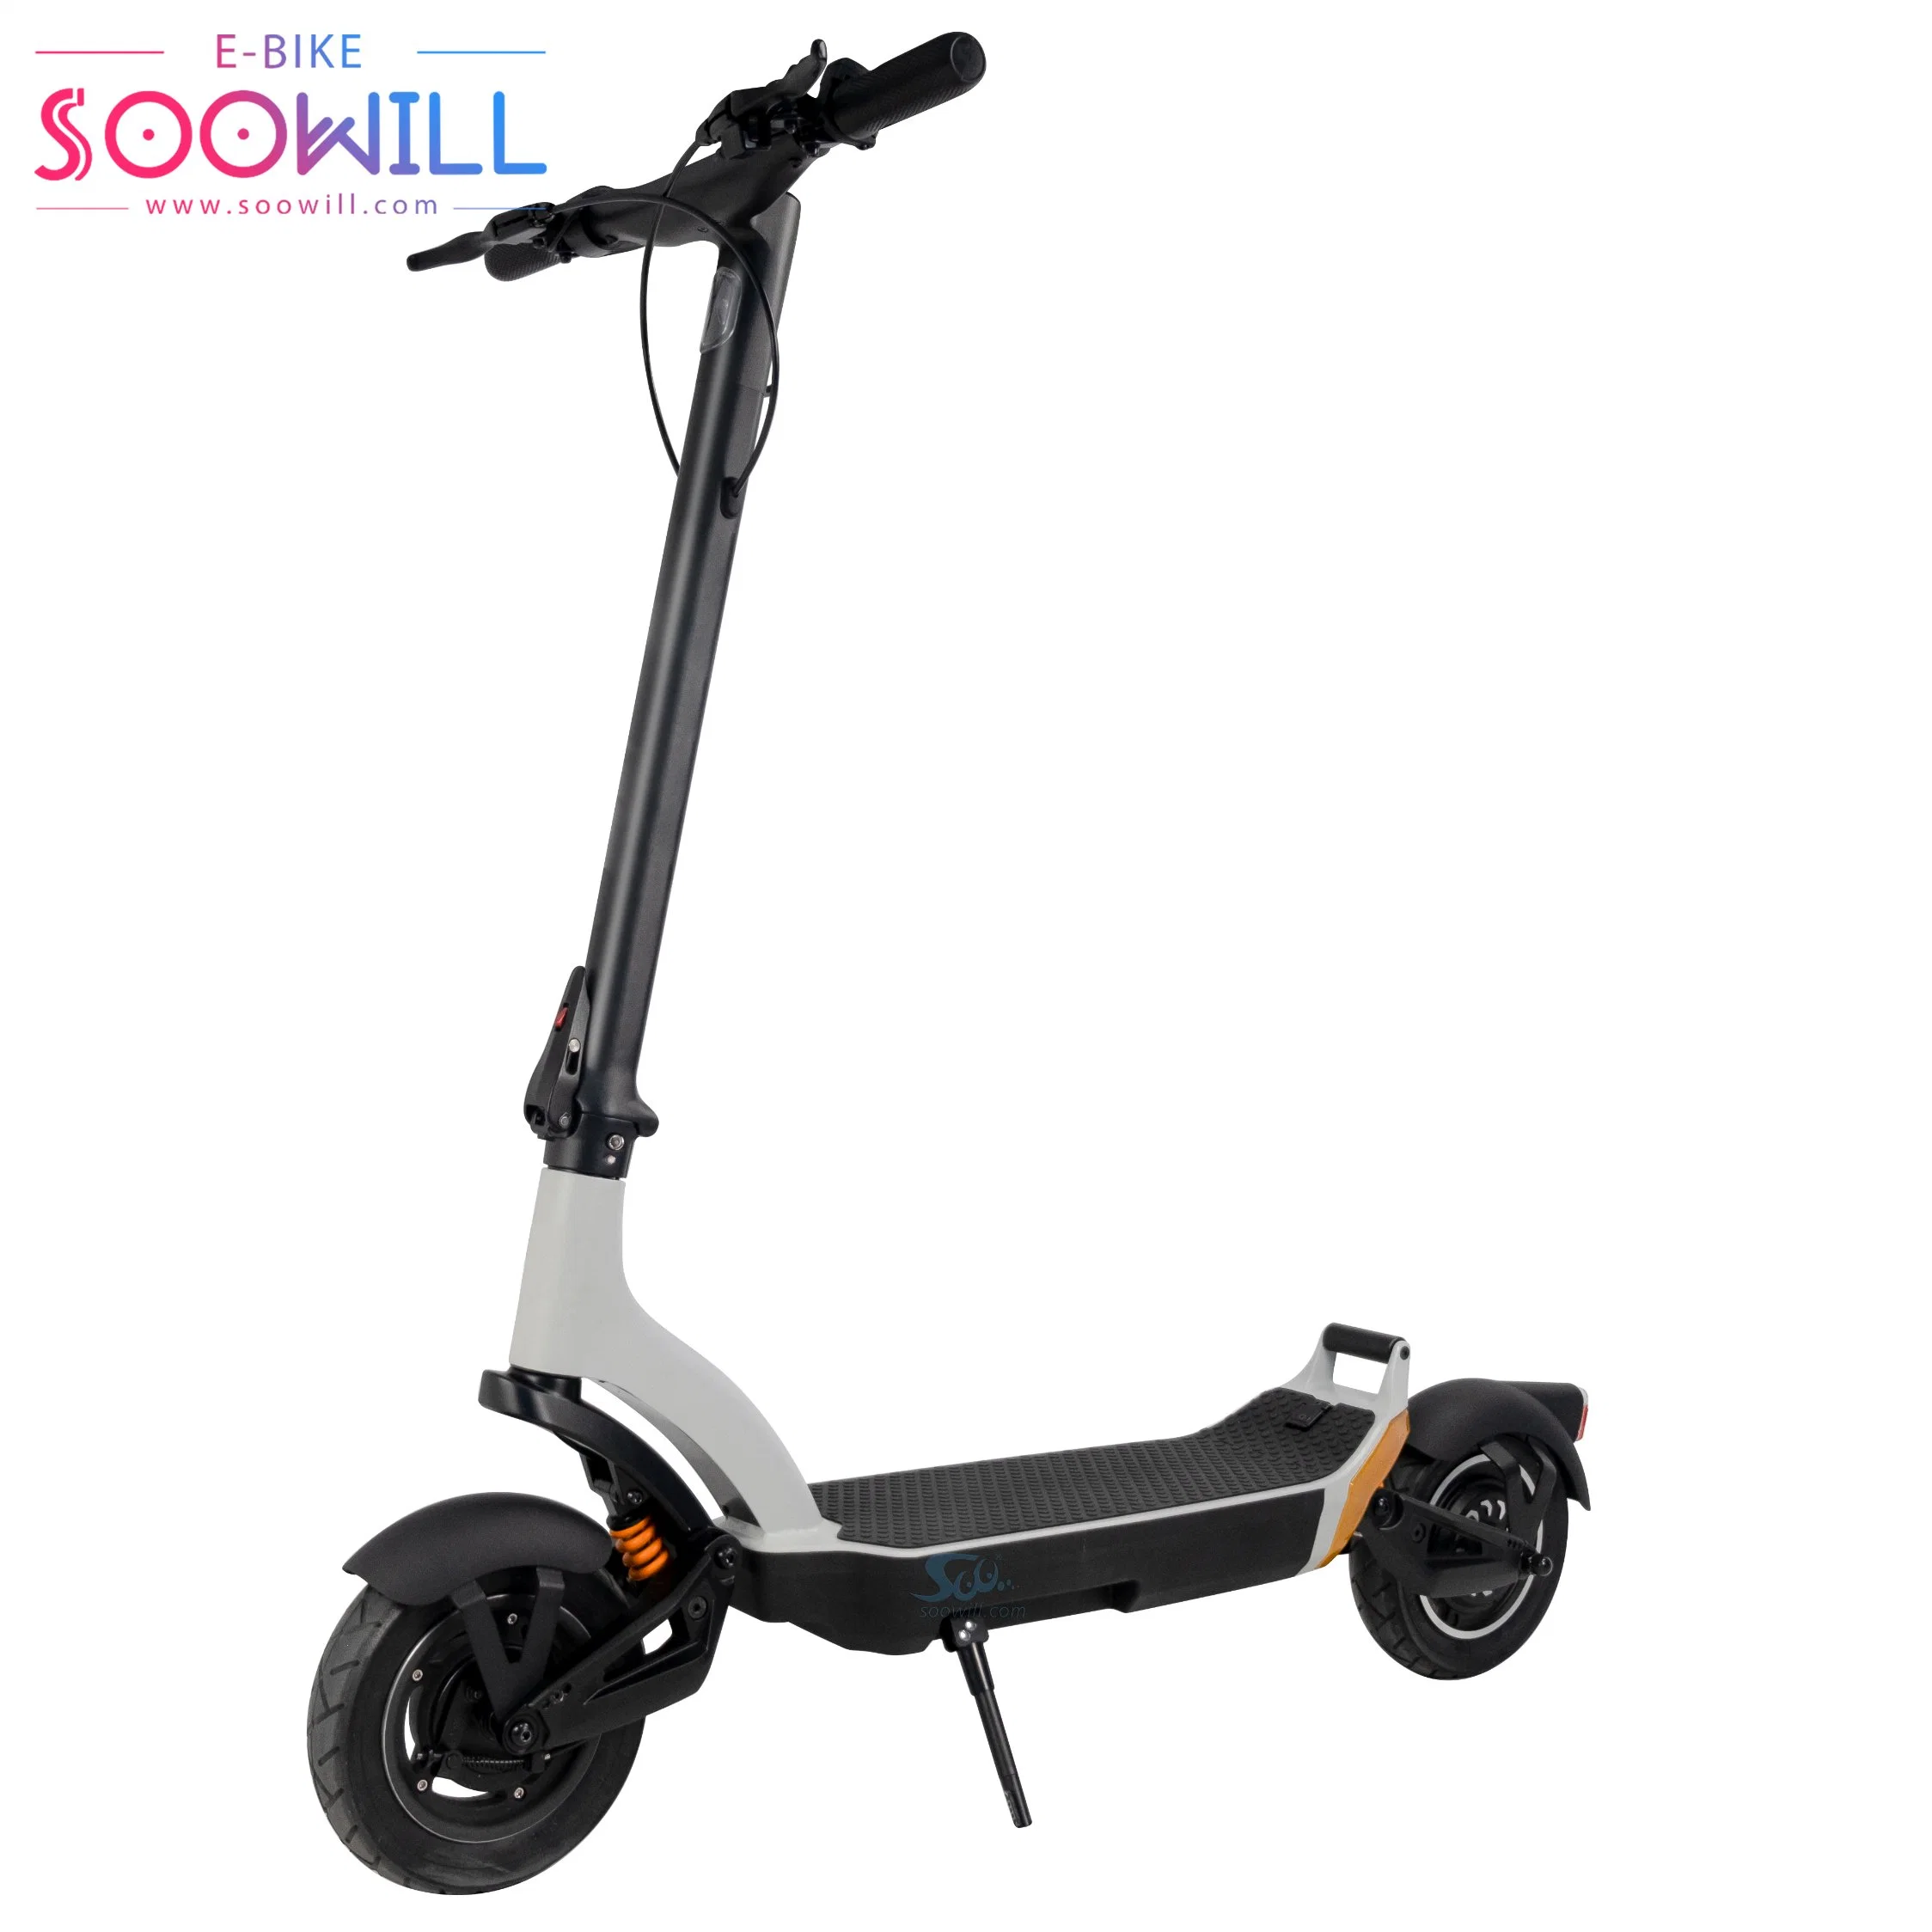 25km/H Foldable 1000W Electric Dirt Bike 48V 13.5ah (Chinese Lithium Battery/4500mAh) Electric Scooter